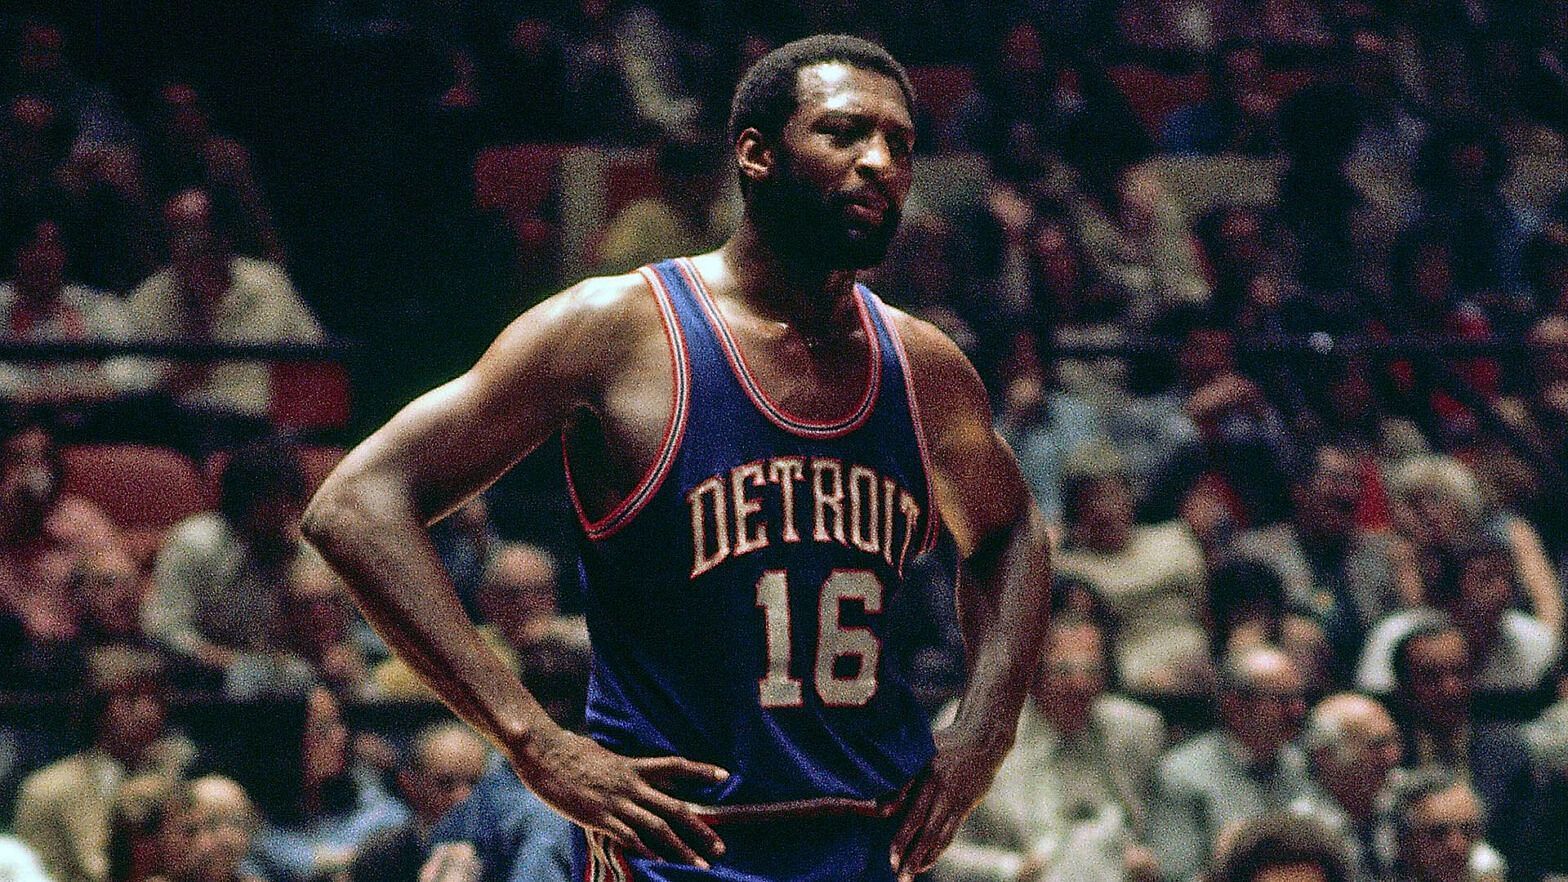 Bob Lanier with the Detroit Pistons in the 1970s.